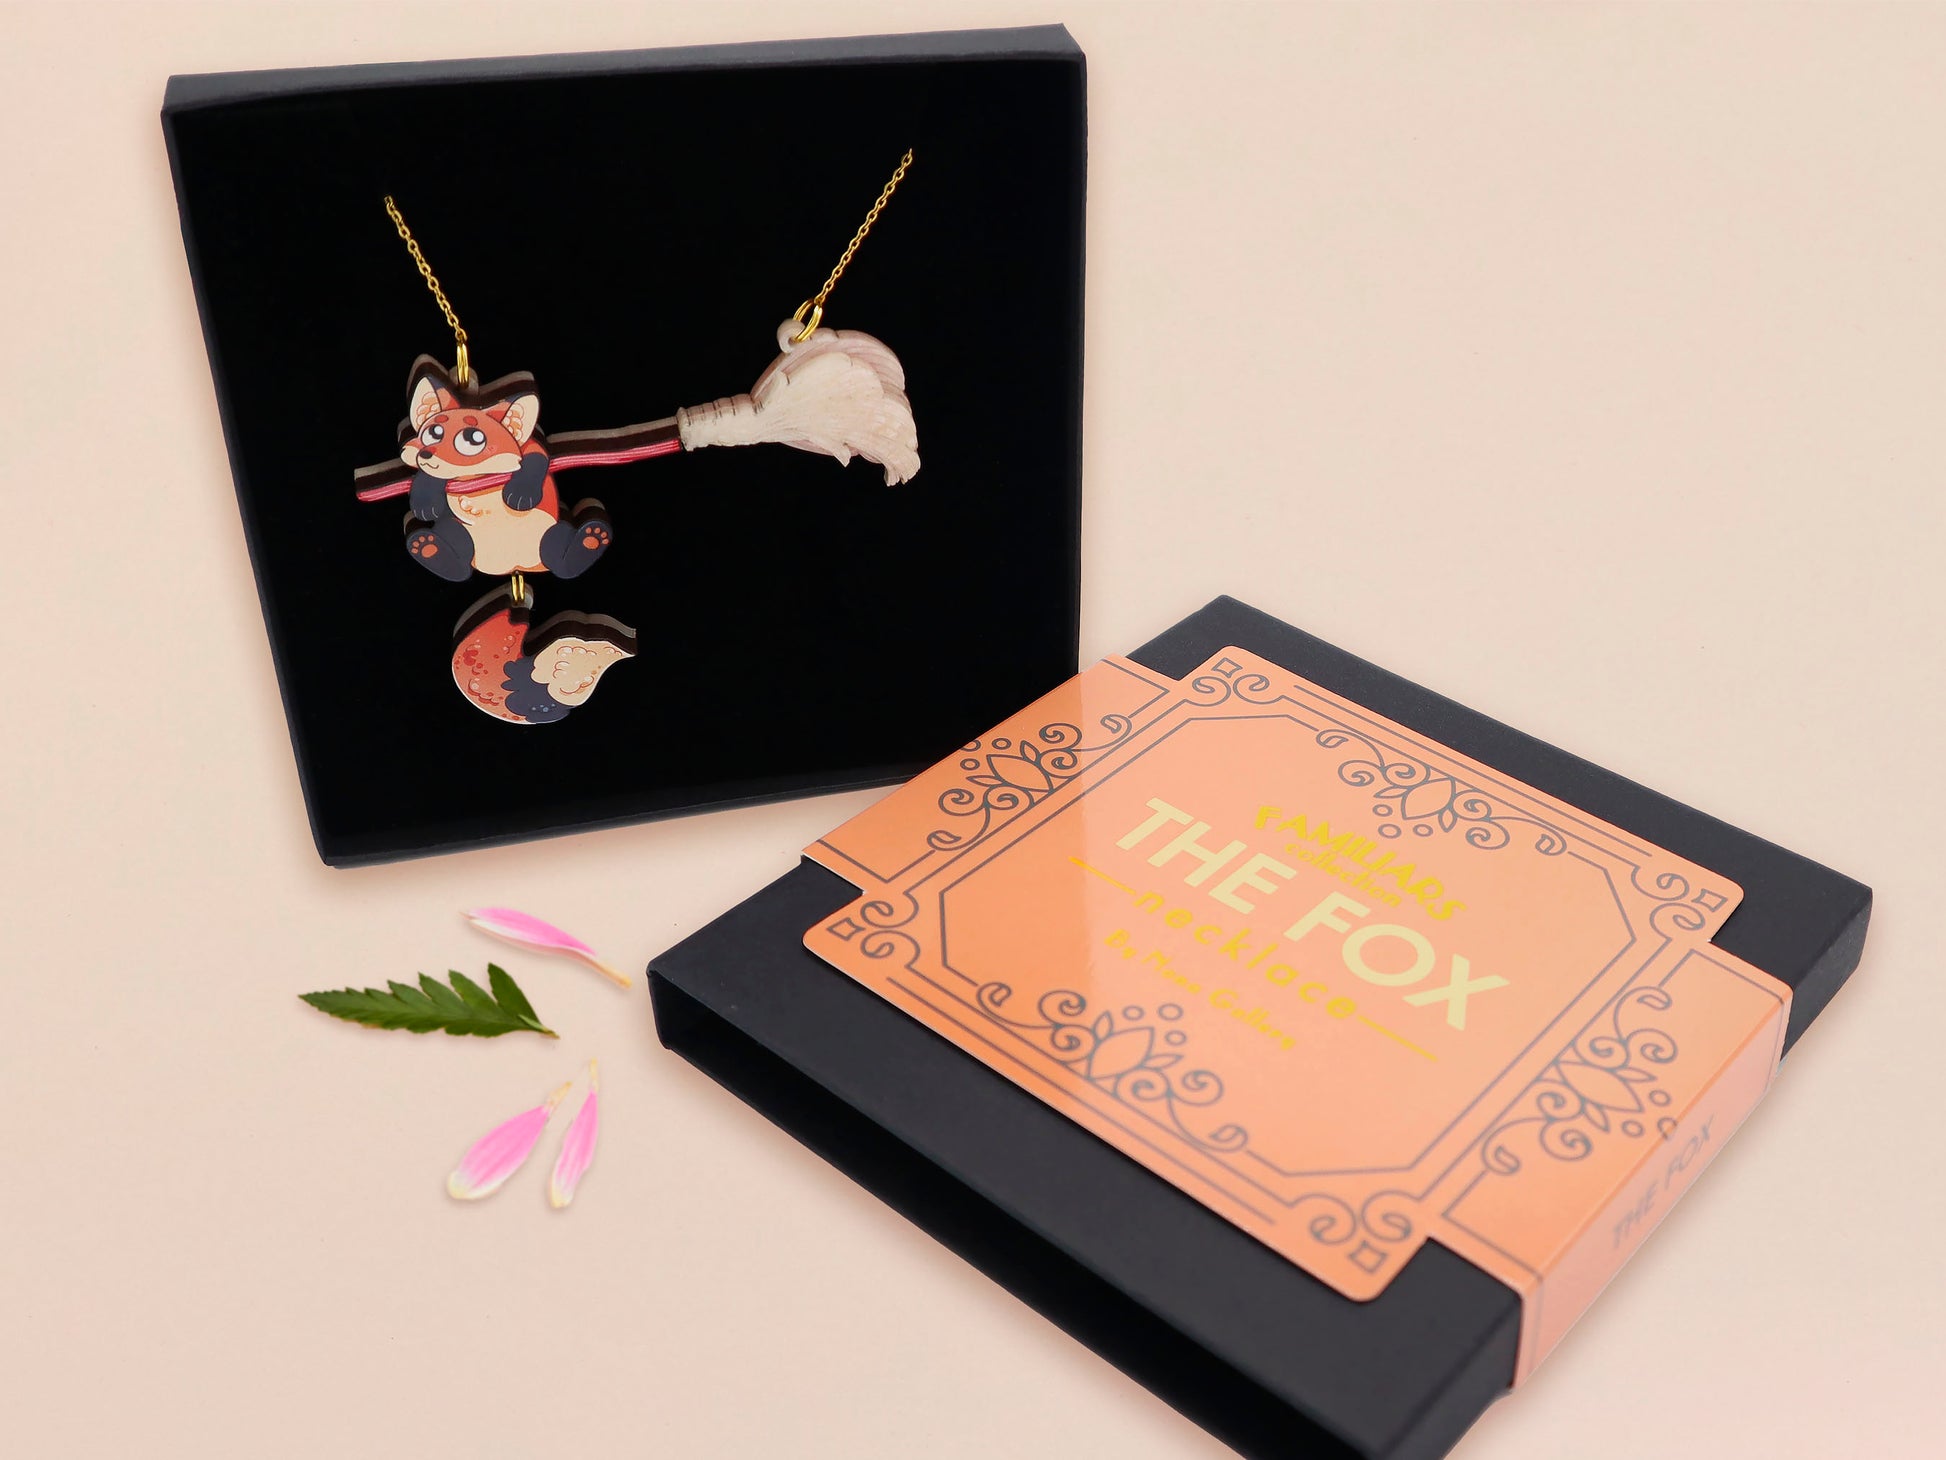 Mixed material handmade necklace of chibi cartoon Fox hanging on to a pearlescent witches broomstick, with a gold chain and black gift box with an orange familiars collection gift sleeve.